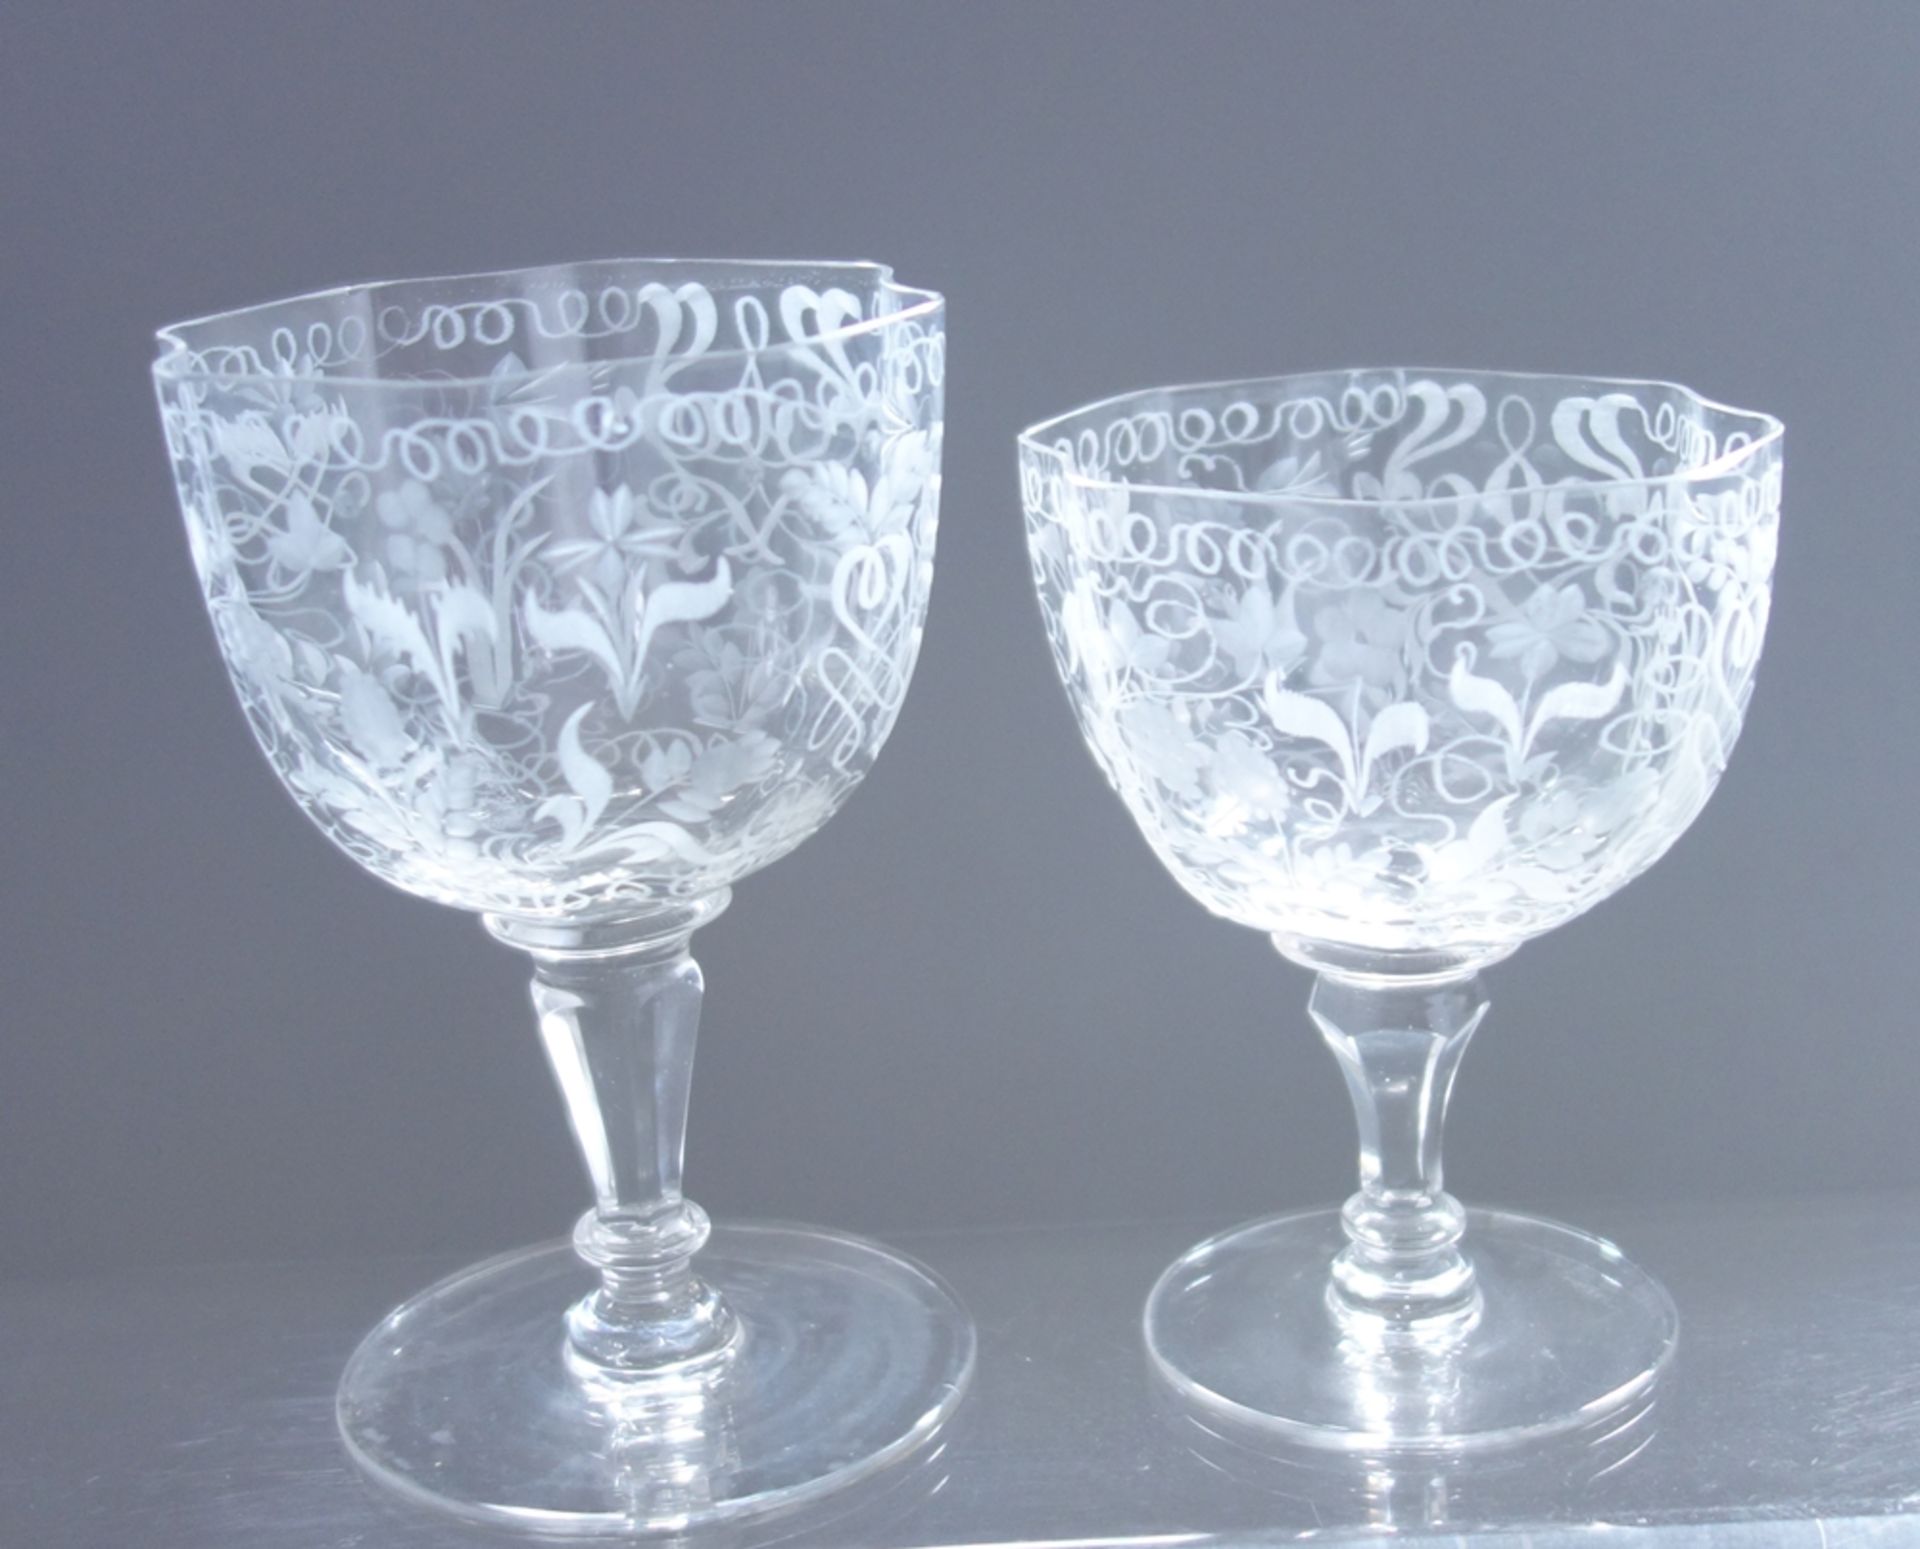 21 high quality wine glasses with delicate floral engraving, 1st half 20th c. - Image 4 of 5